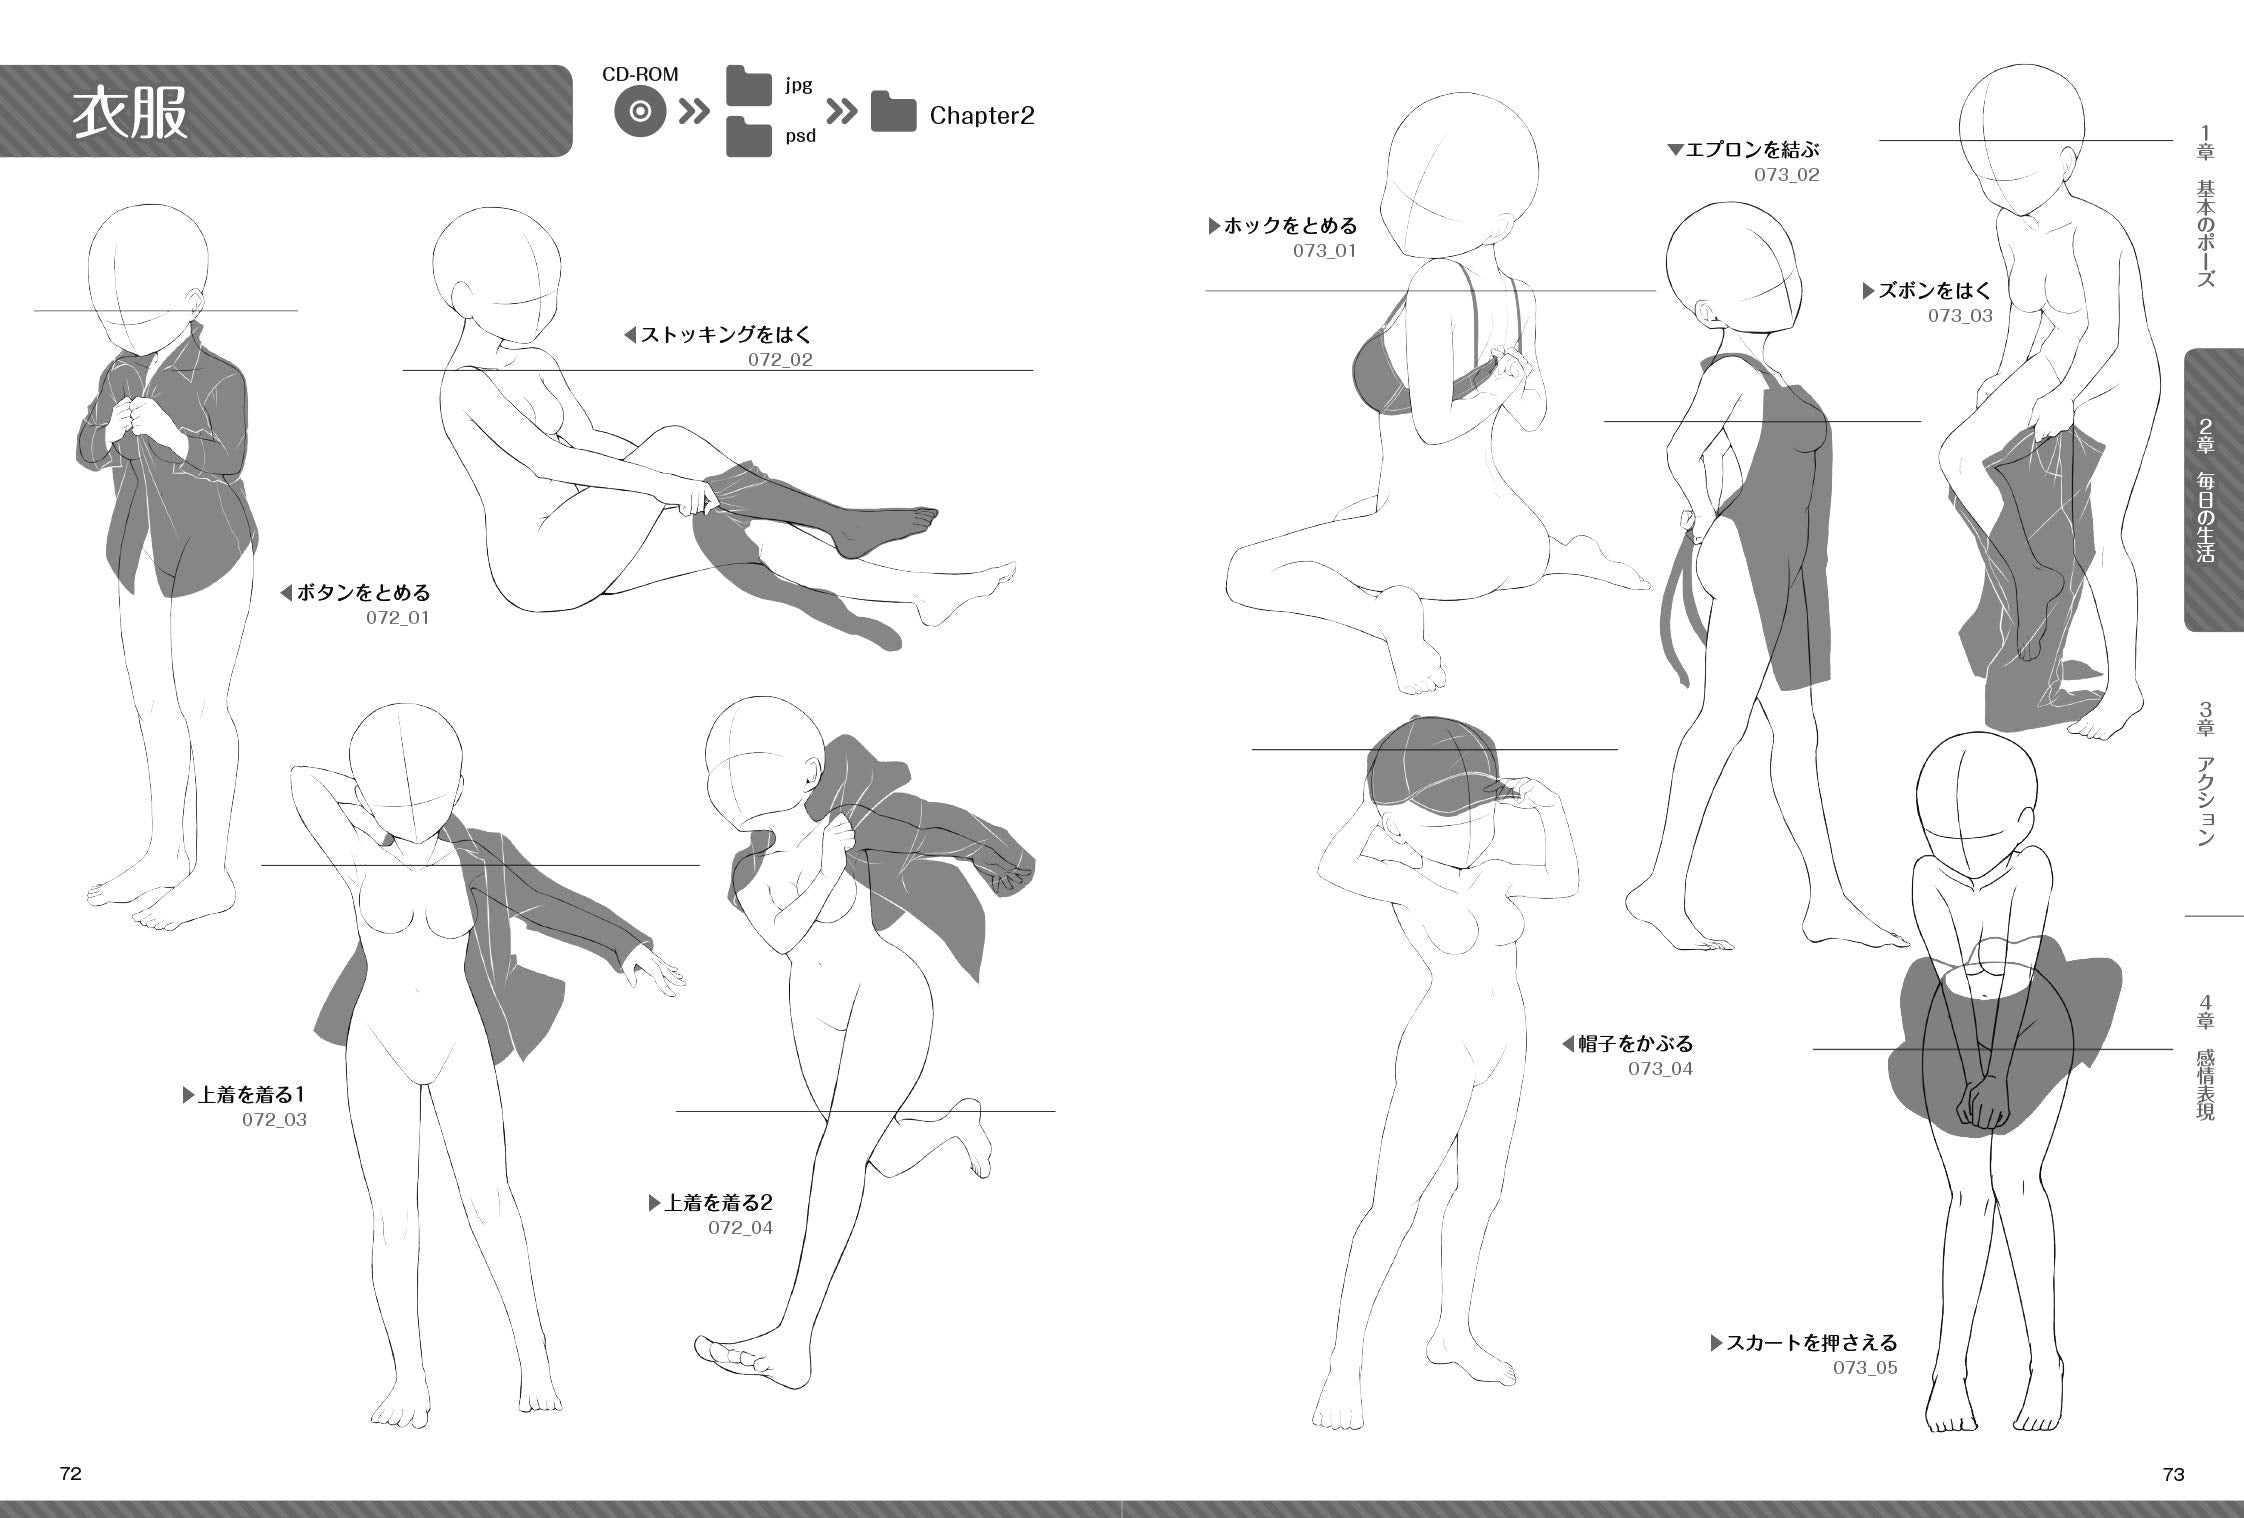 CUTE ANIME GIRL POSES FROM BASIC SHAPES (How To Draw) - YouTube